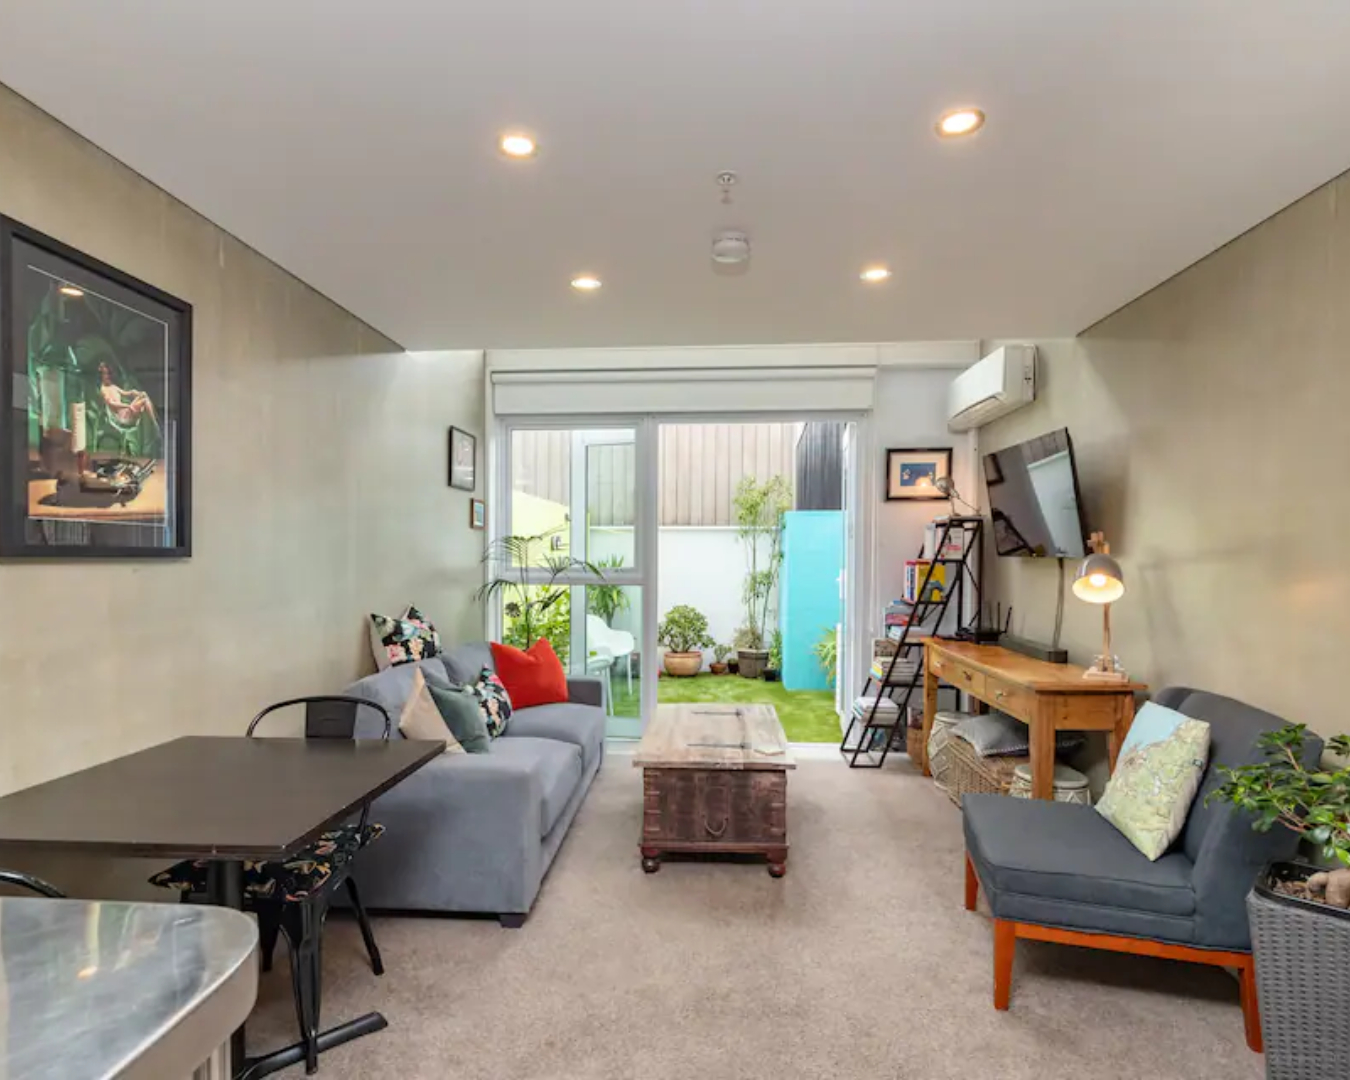 The living area in the Canvas Apartment leads to a light-filled, private courtyard and is one of the best airbnbs in Wellington.